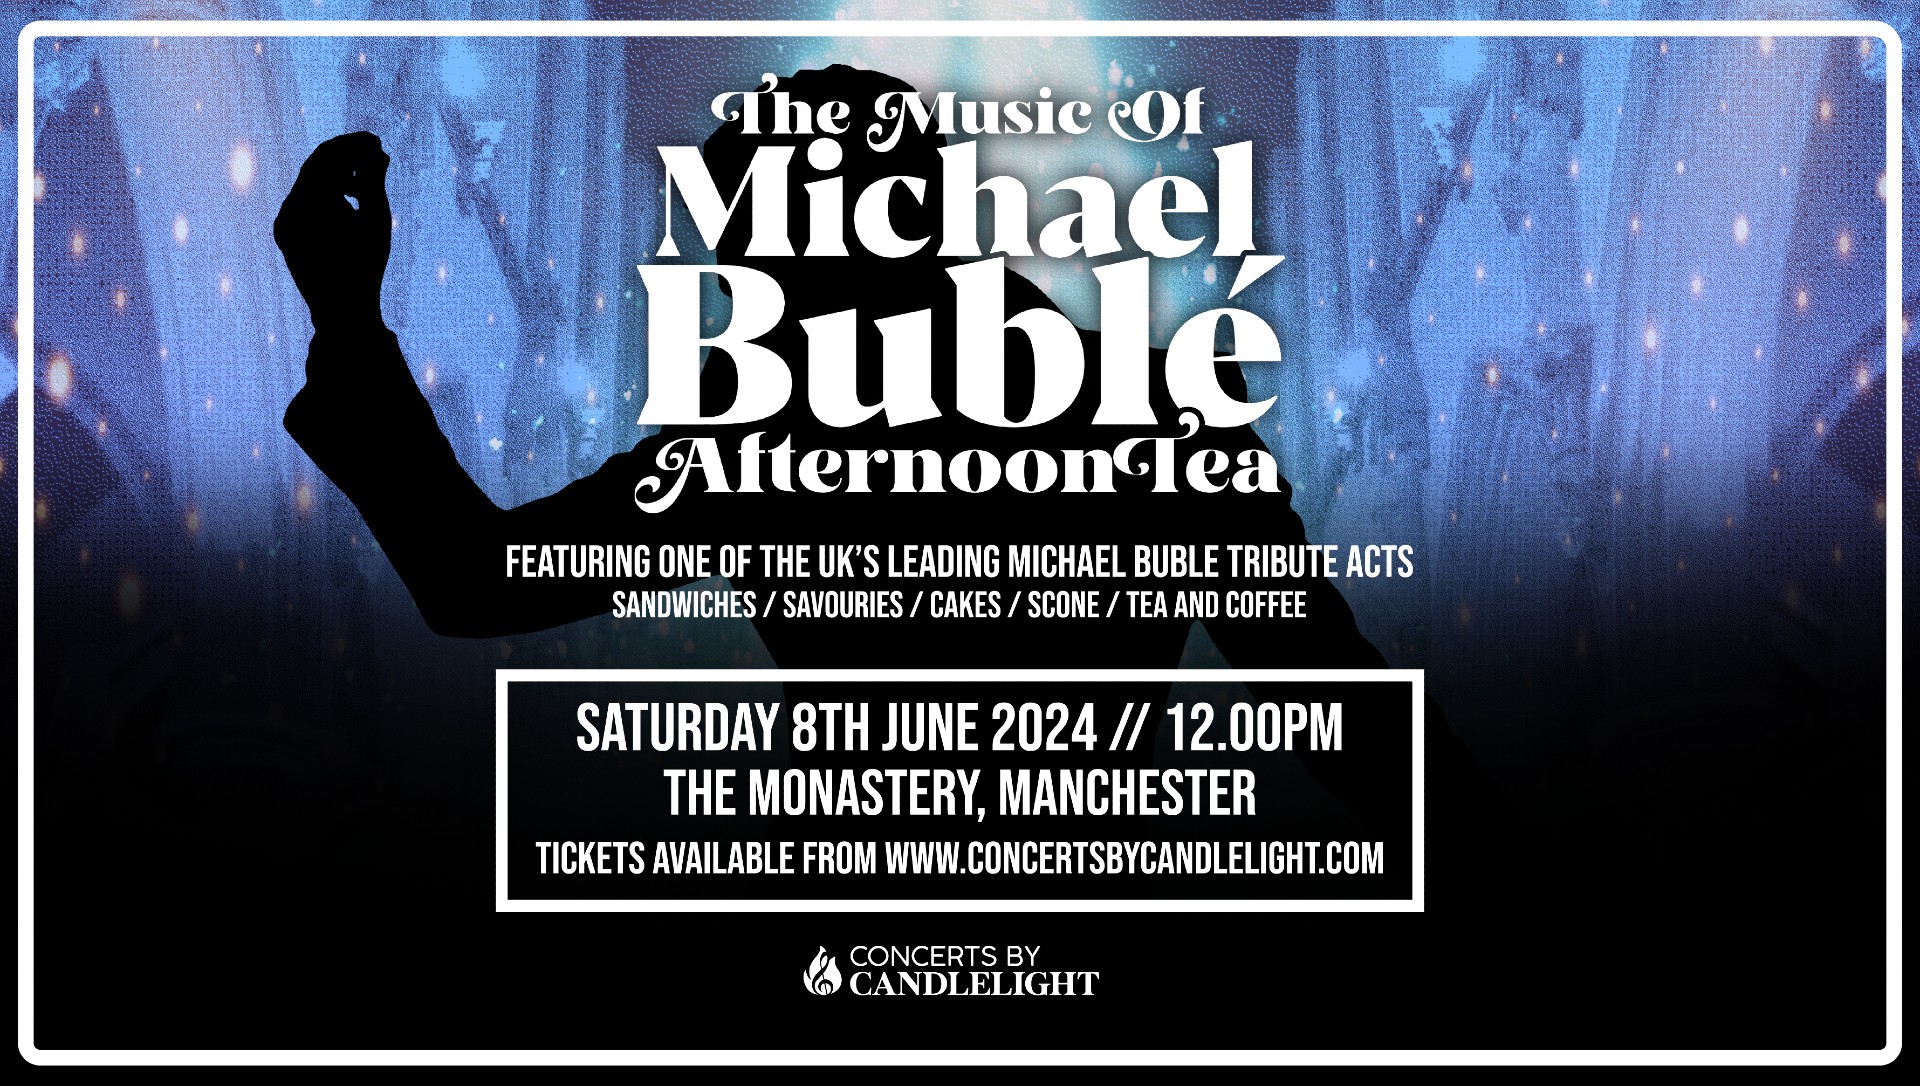 Michael Buble tribute at Manchester Monastery